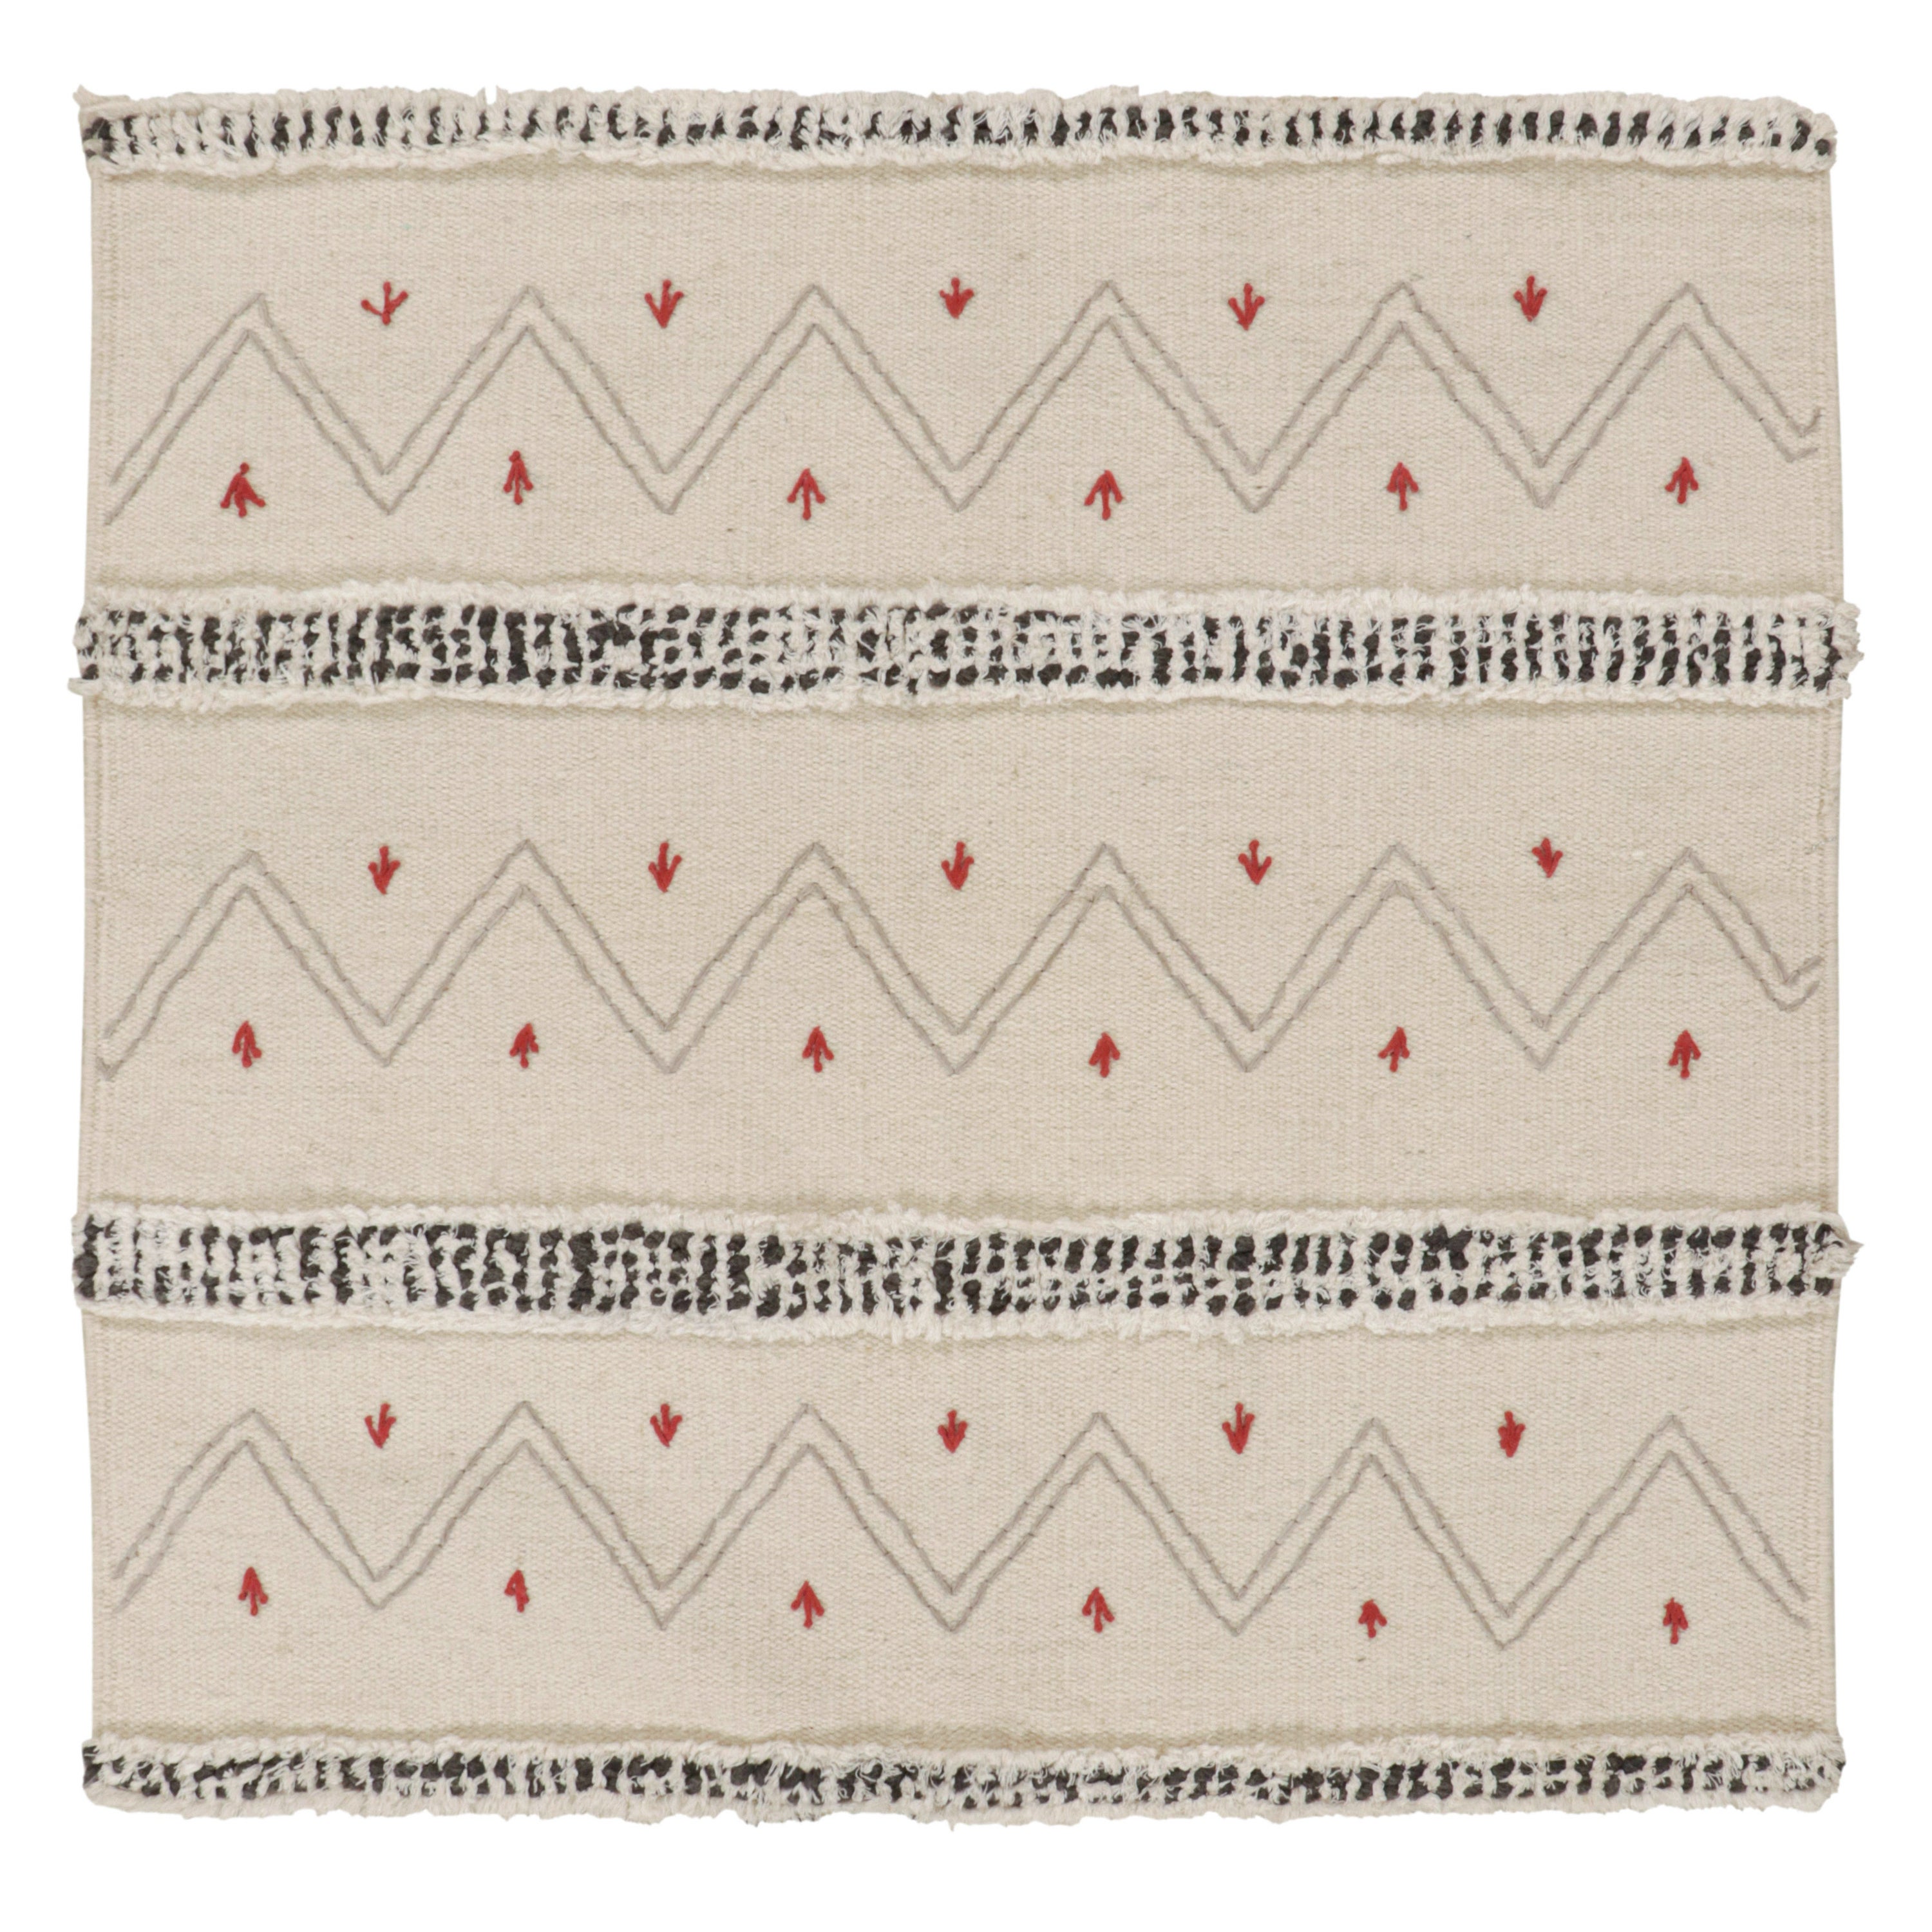 Rug & Kilim’s Tribal-Style Kilim in off White, Gray and Red Geometric Patterns For Sale